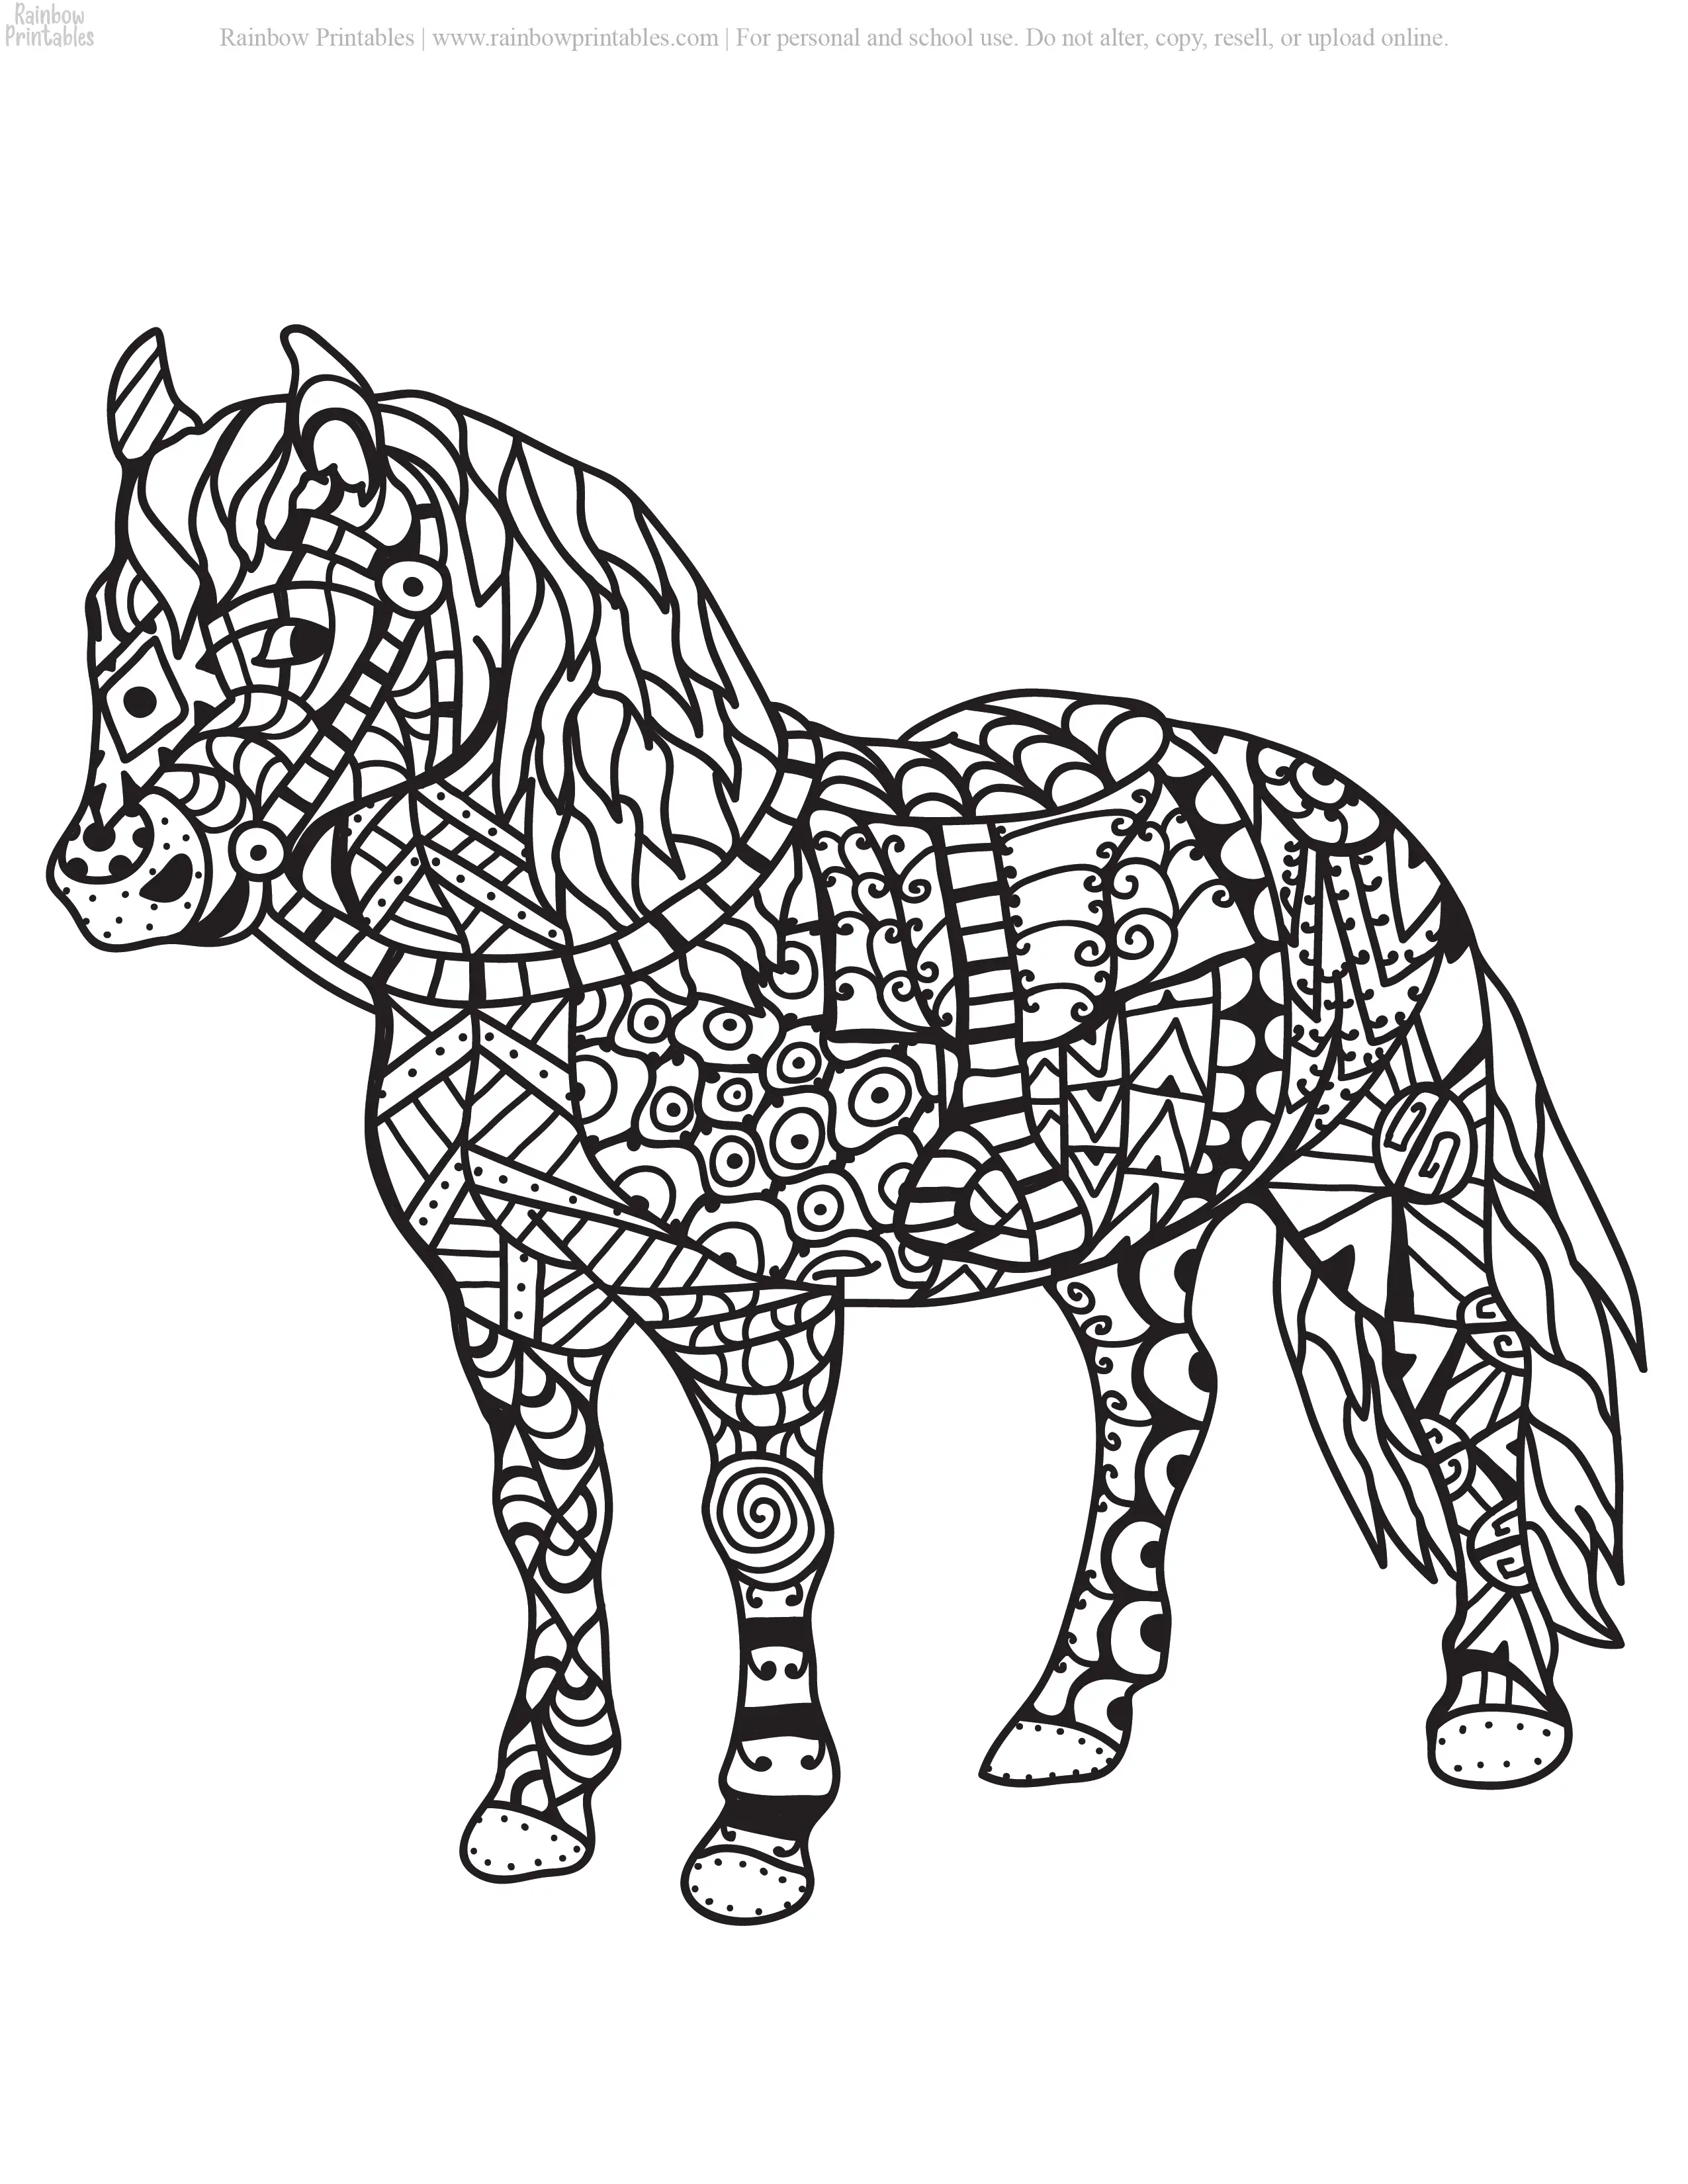 MOASIC MANDALA SEA HORSE PATTERN FANTASY COLORING PAGES FOR KIDS ADULTS GROWN UP PRINTABLE ACTIVITY